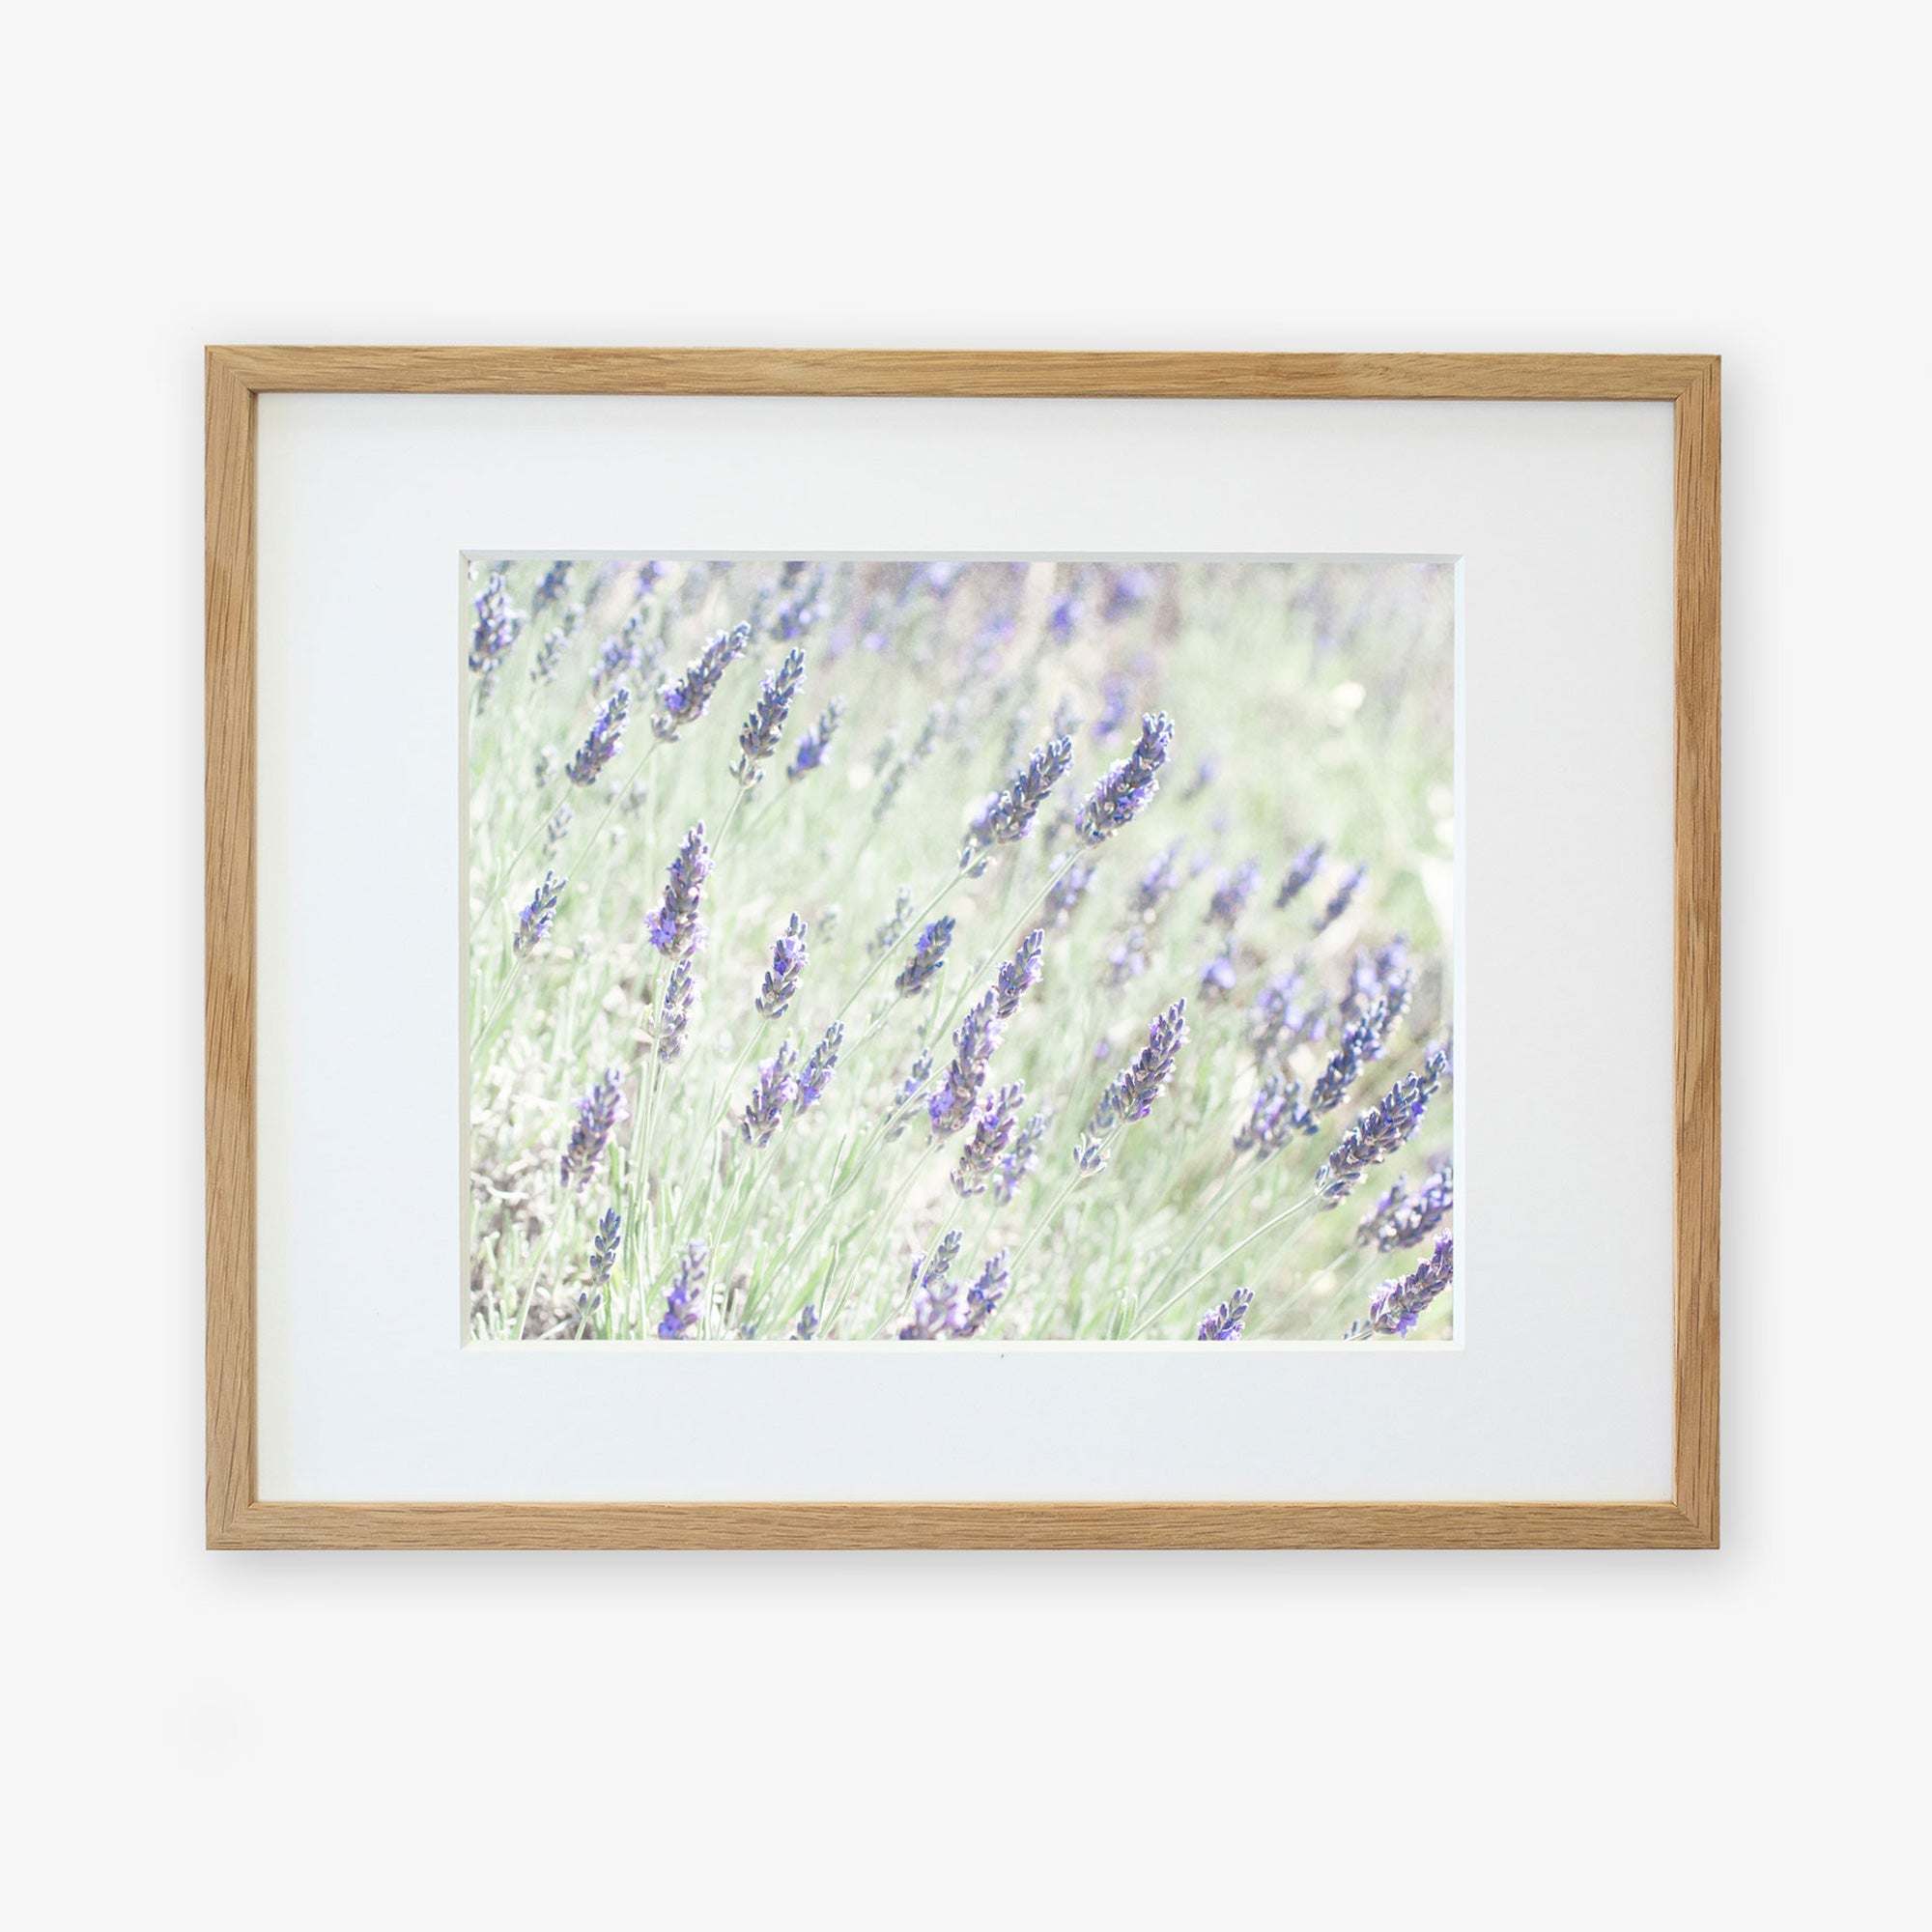 A framed photograph of Floral Purple Print, 'Lavender for LaLa' flowers in bloom, printed on archival photographic paper, displayed with a light natural wood frame, against a white background by Offley Green.